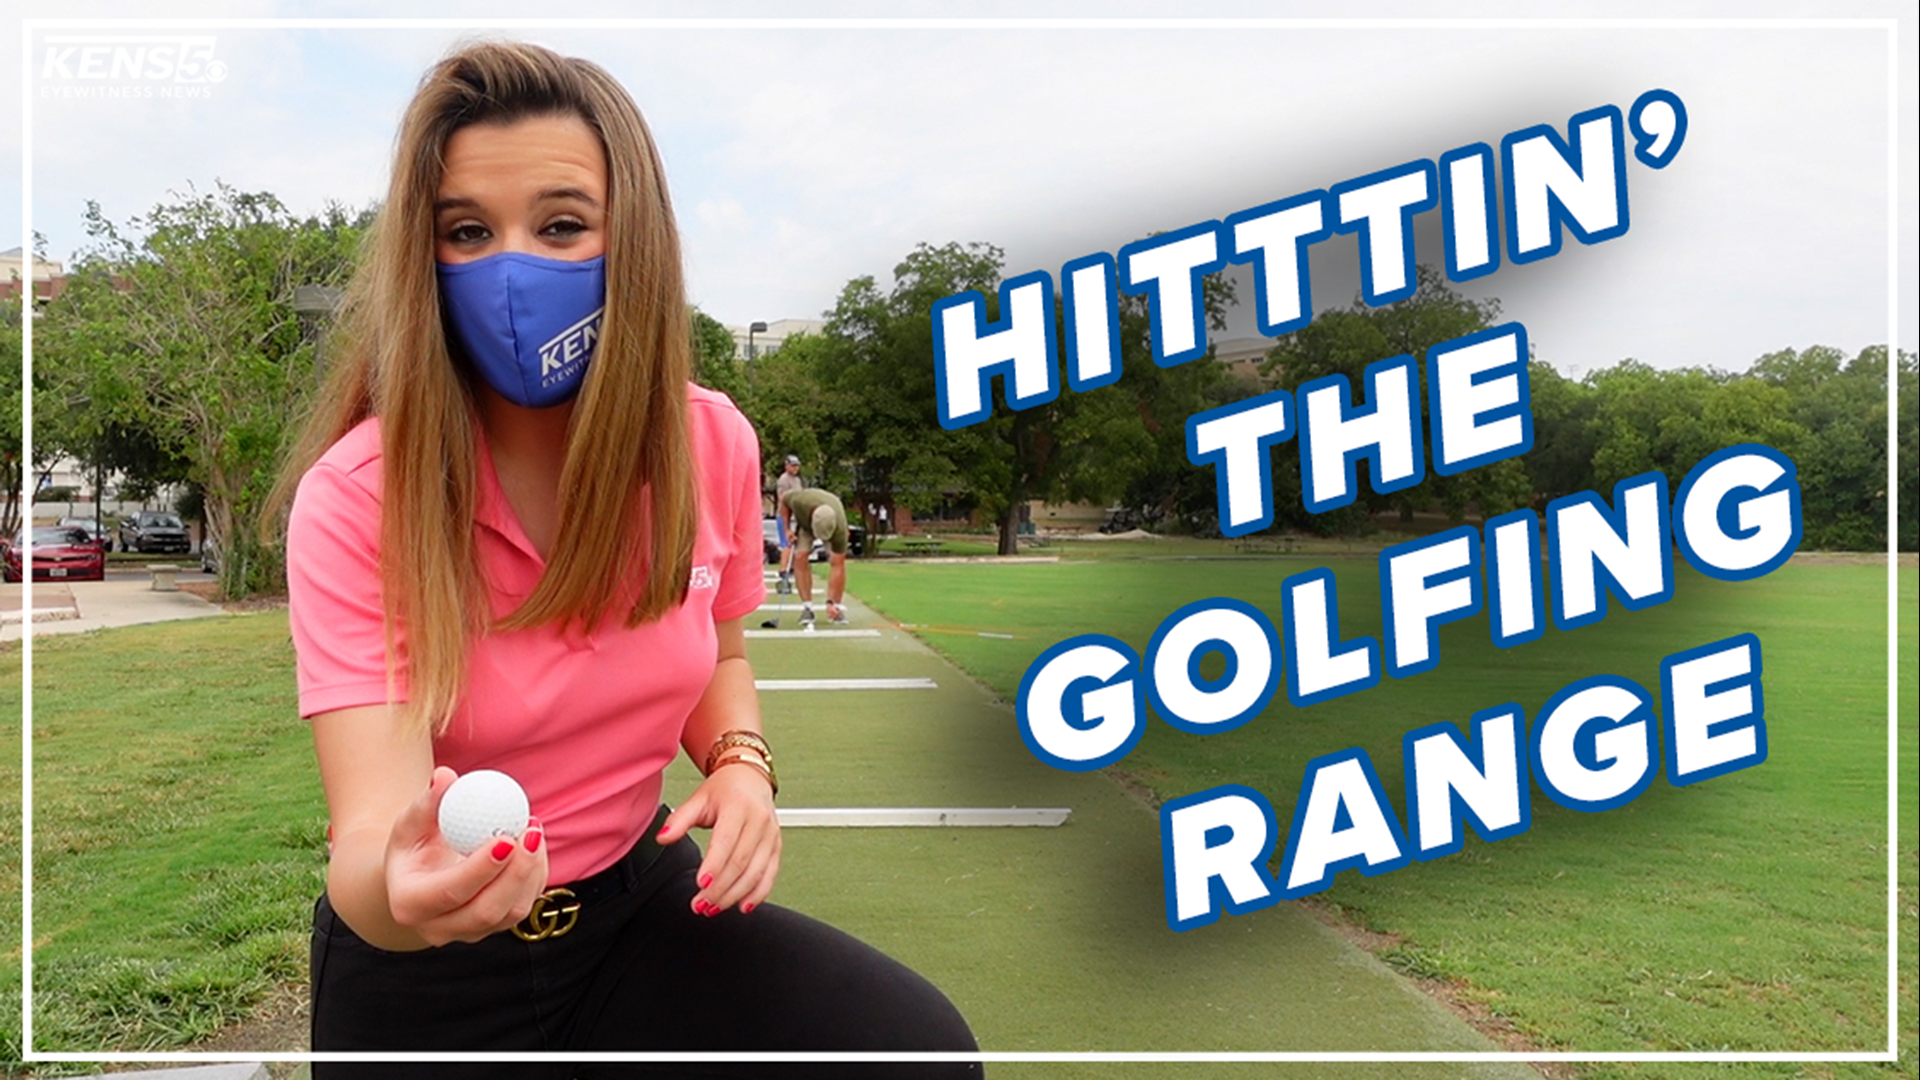 Golf is a low-contact, family-friendly sport. Here's what one range in San Antonio is doing to keep visitors safe.